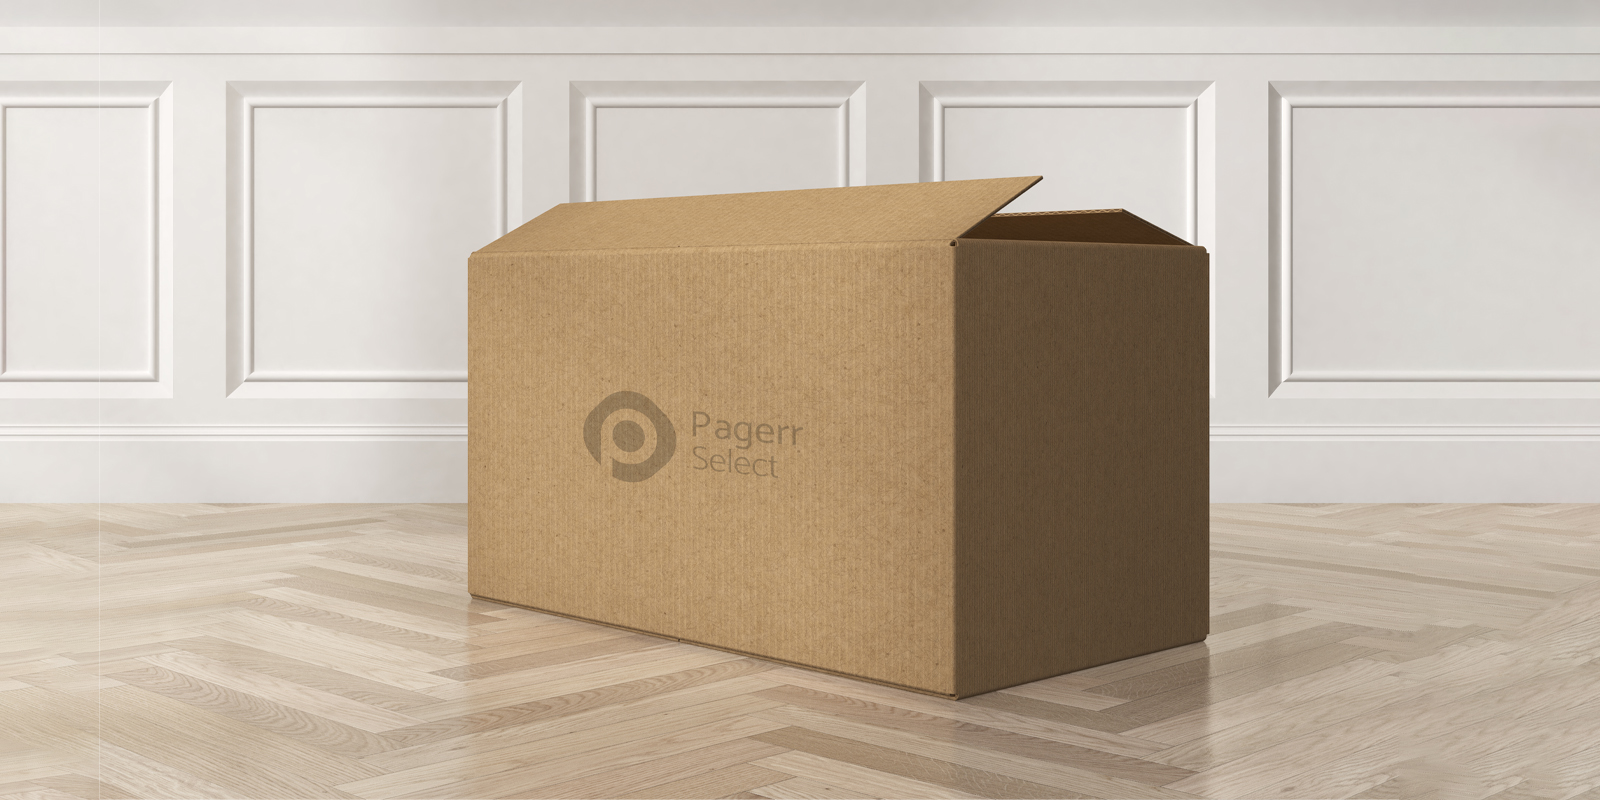 Moving boxes in Madrid - Print with Pagerr